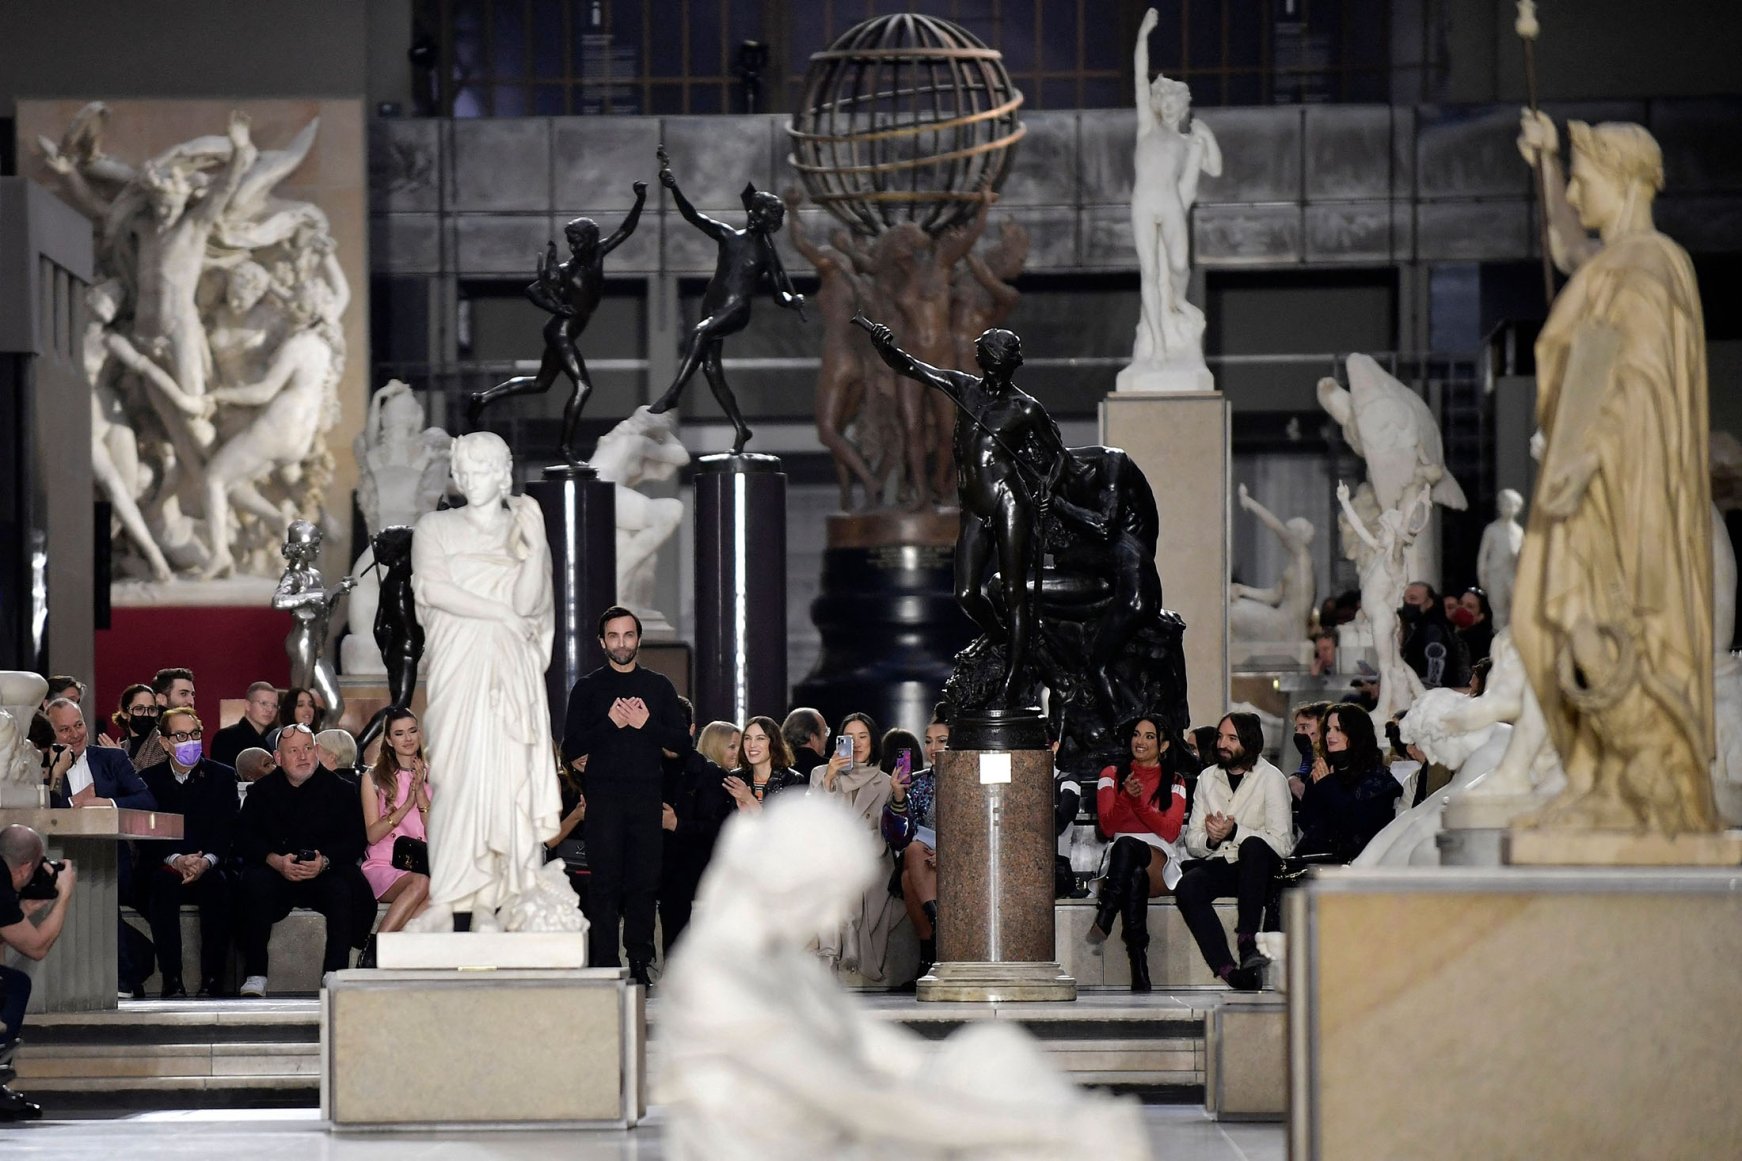 Louis Vuitton takes over Orsay museum for its Paris fashion show